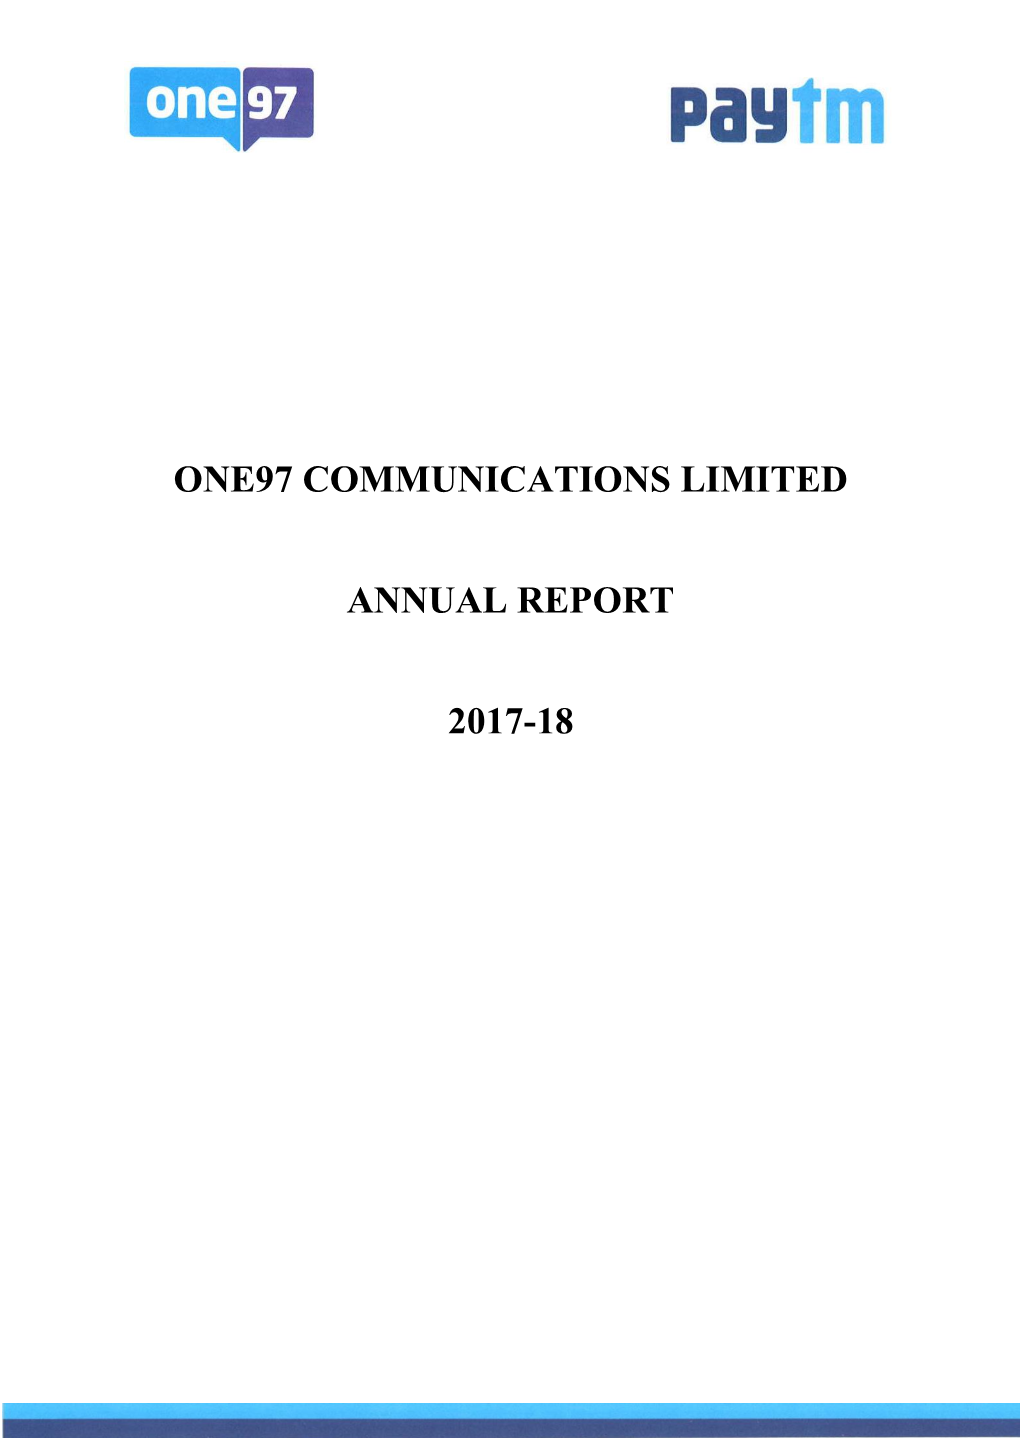 One97 Communications Limited Annual Report 2017-18